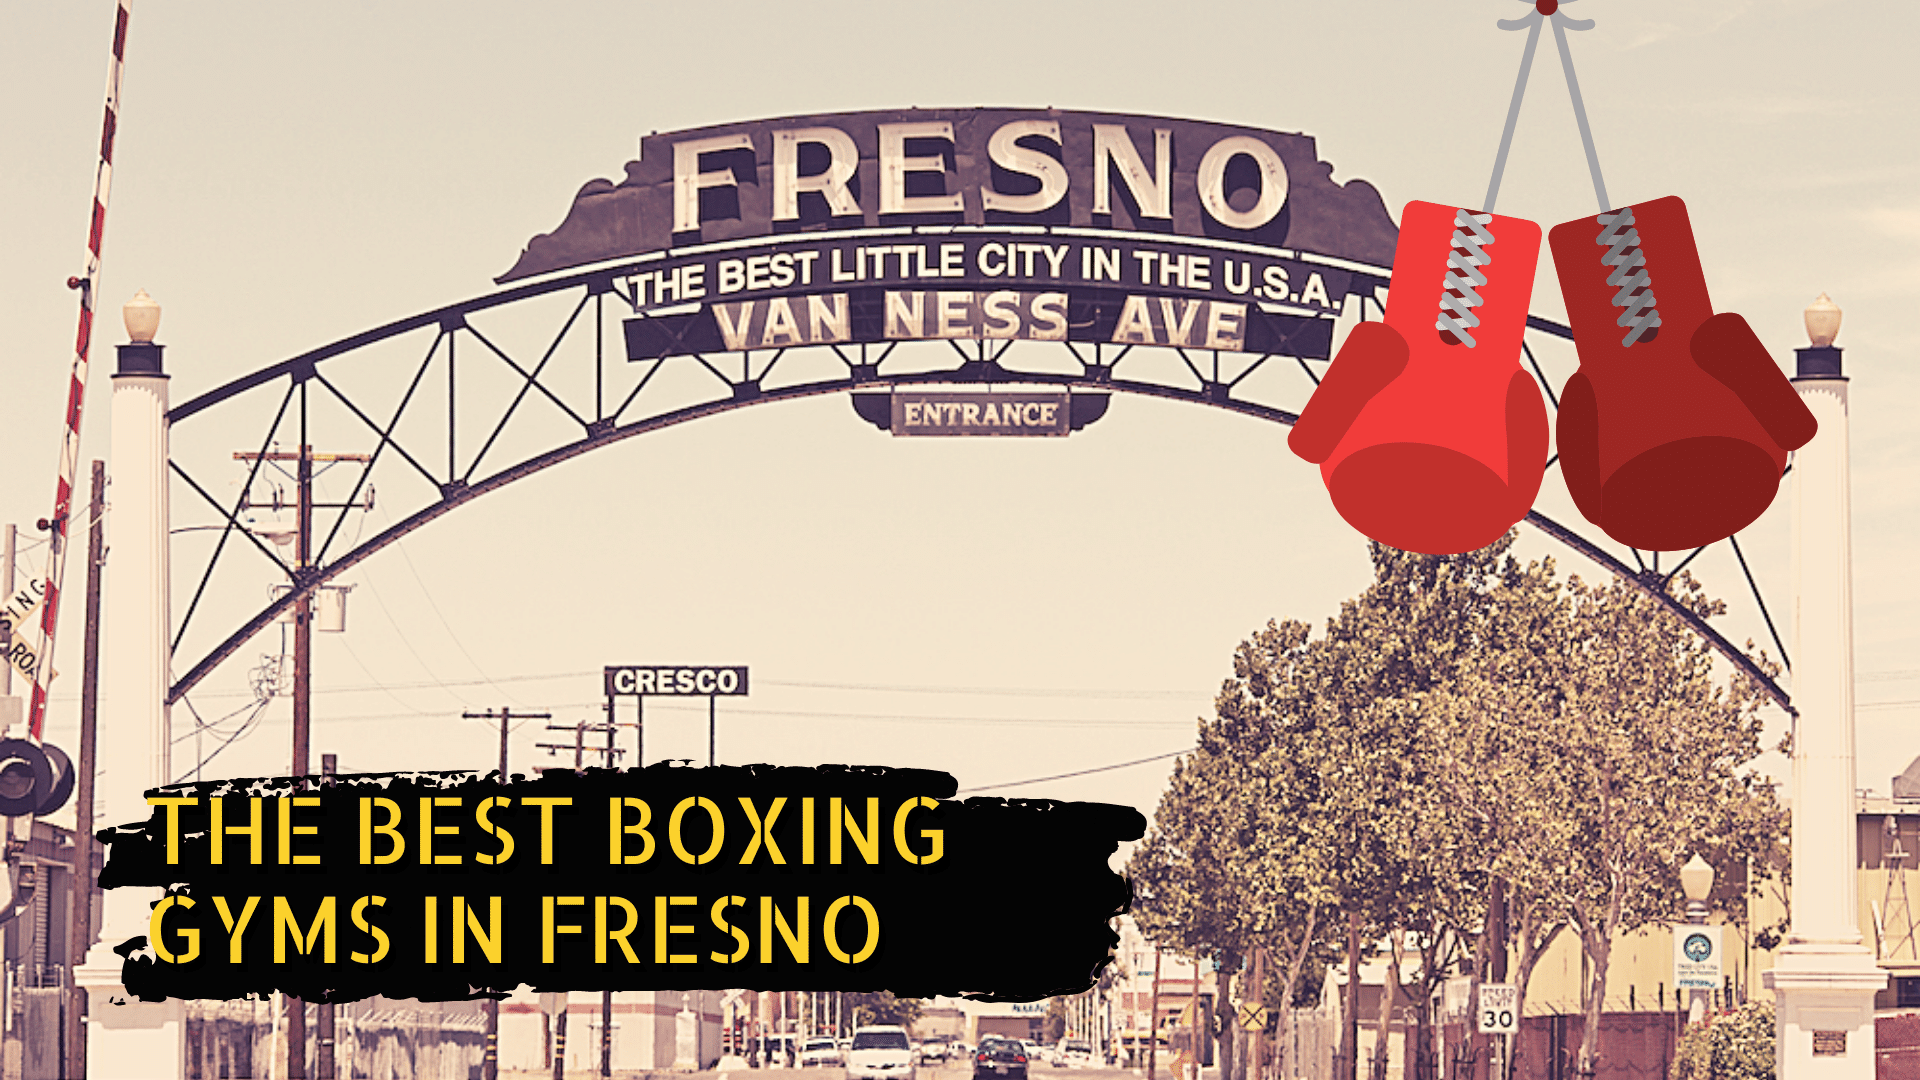 Boxing gloves over an image of a sign in Fresno